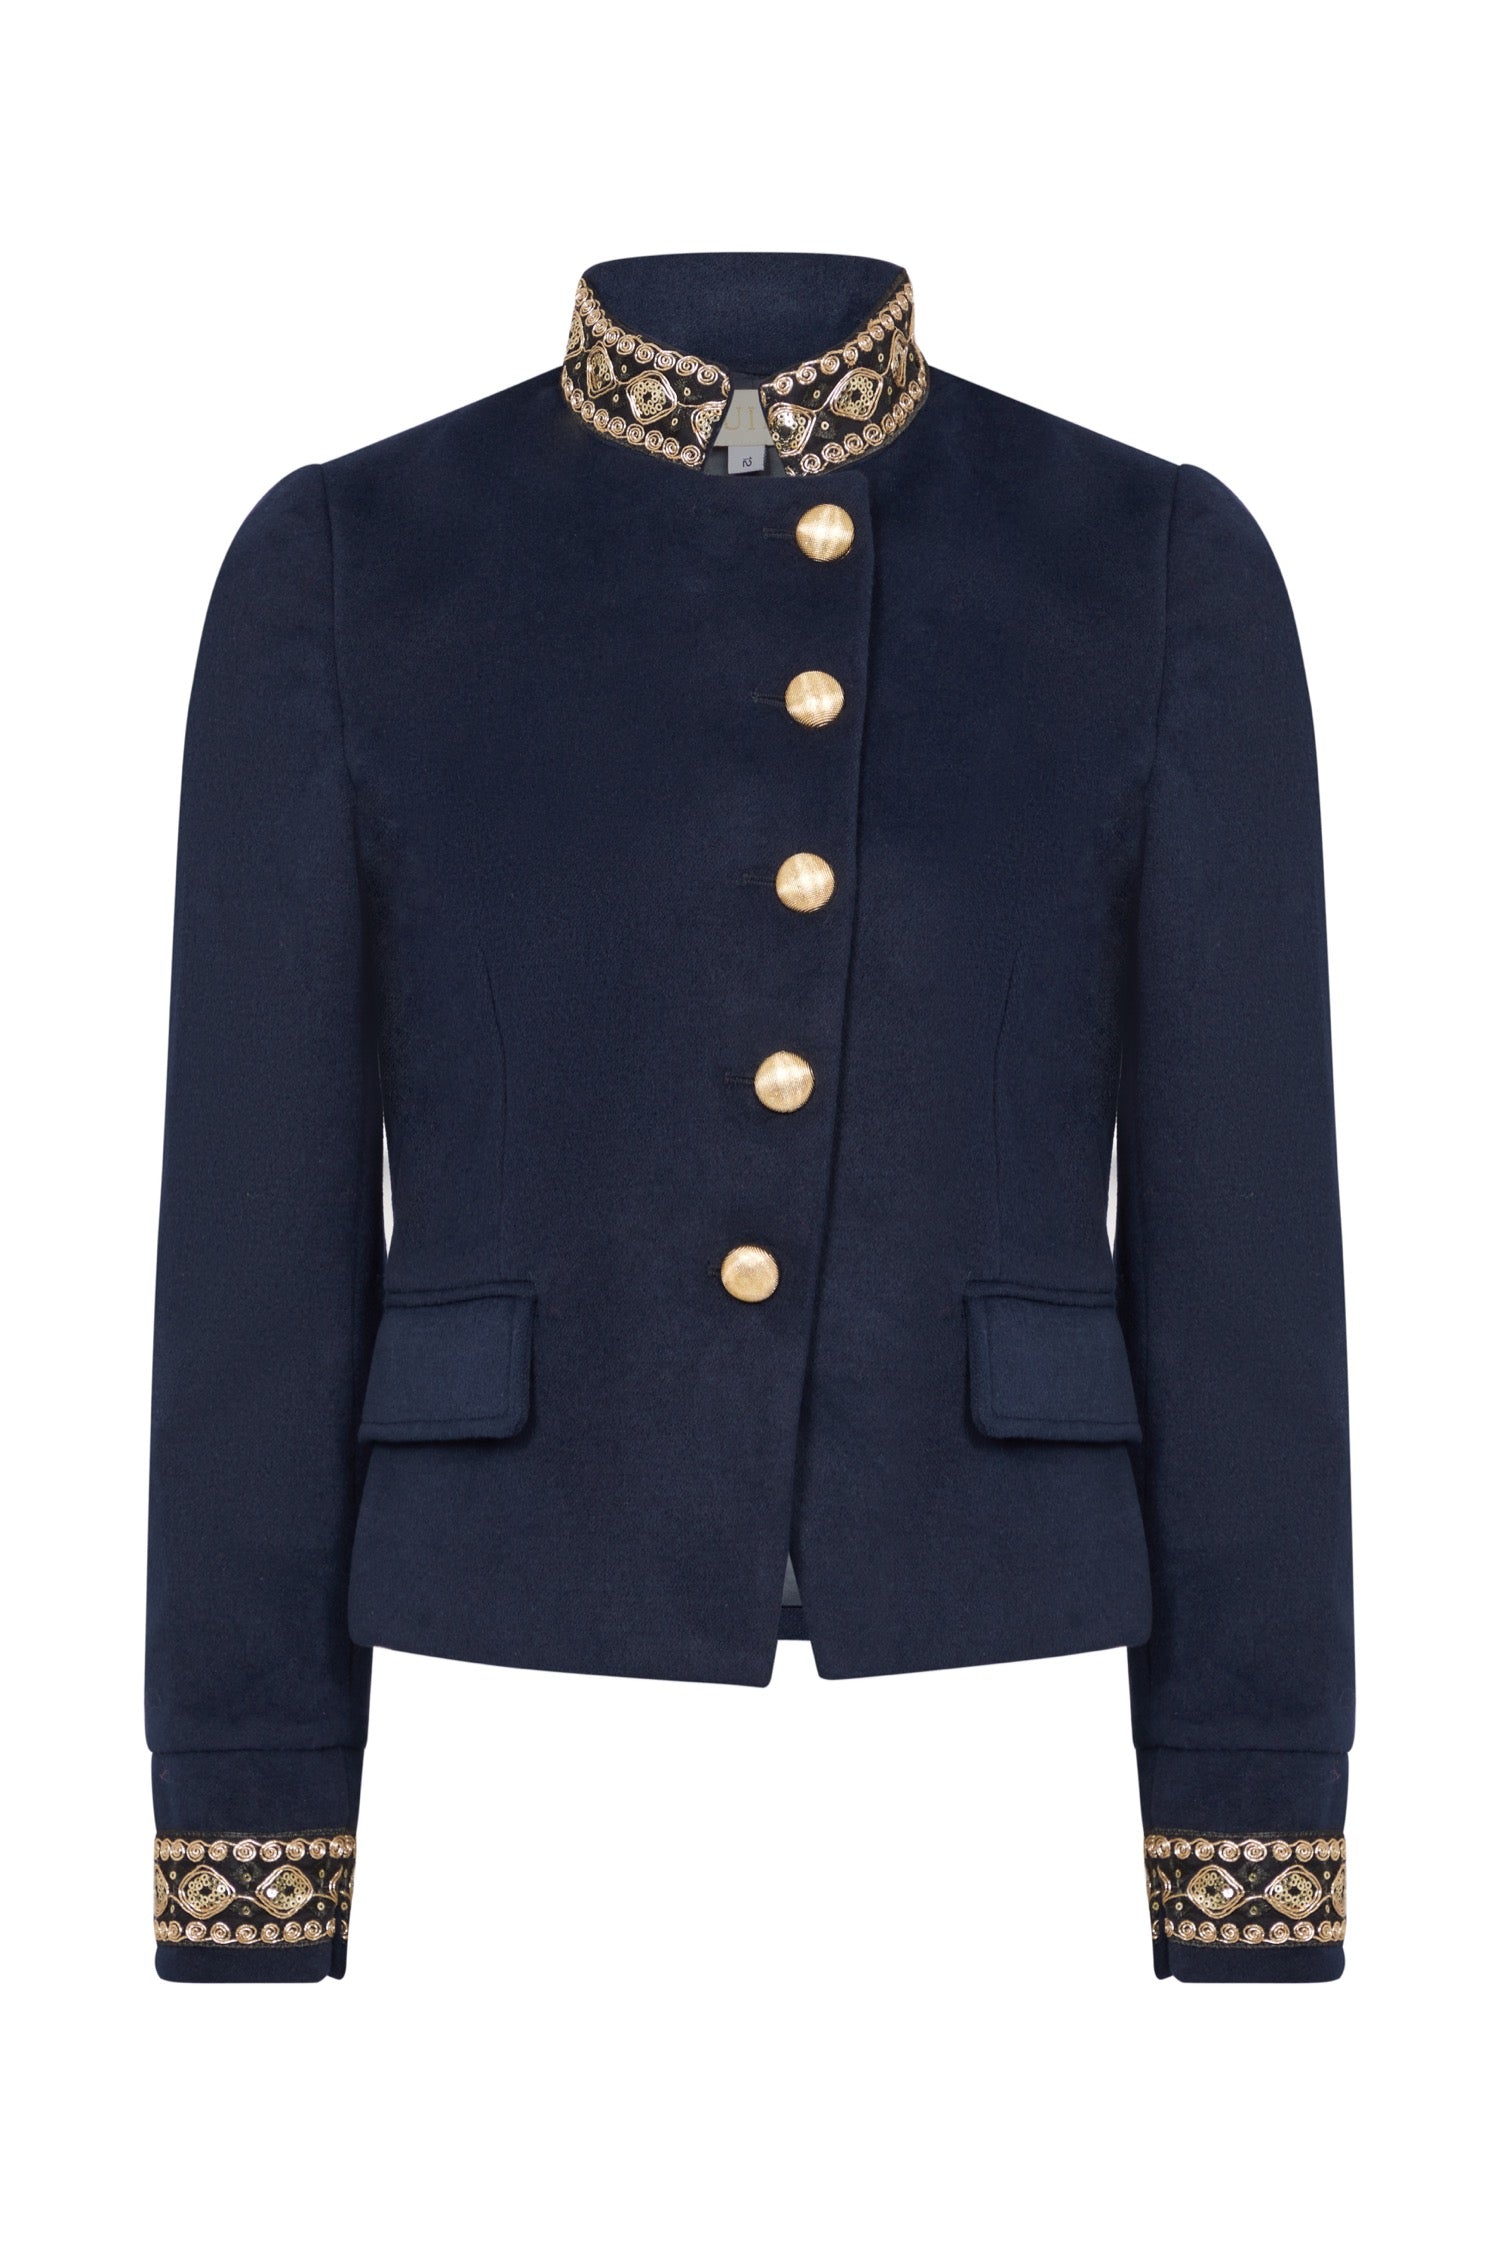 Women’s Gold / Blue Navy Military Jacket With Gold Sequin Braid Details Extra Large Guinea